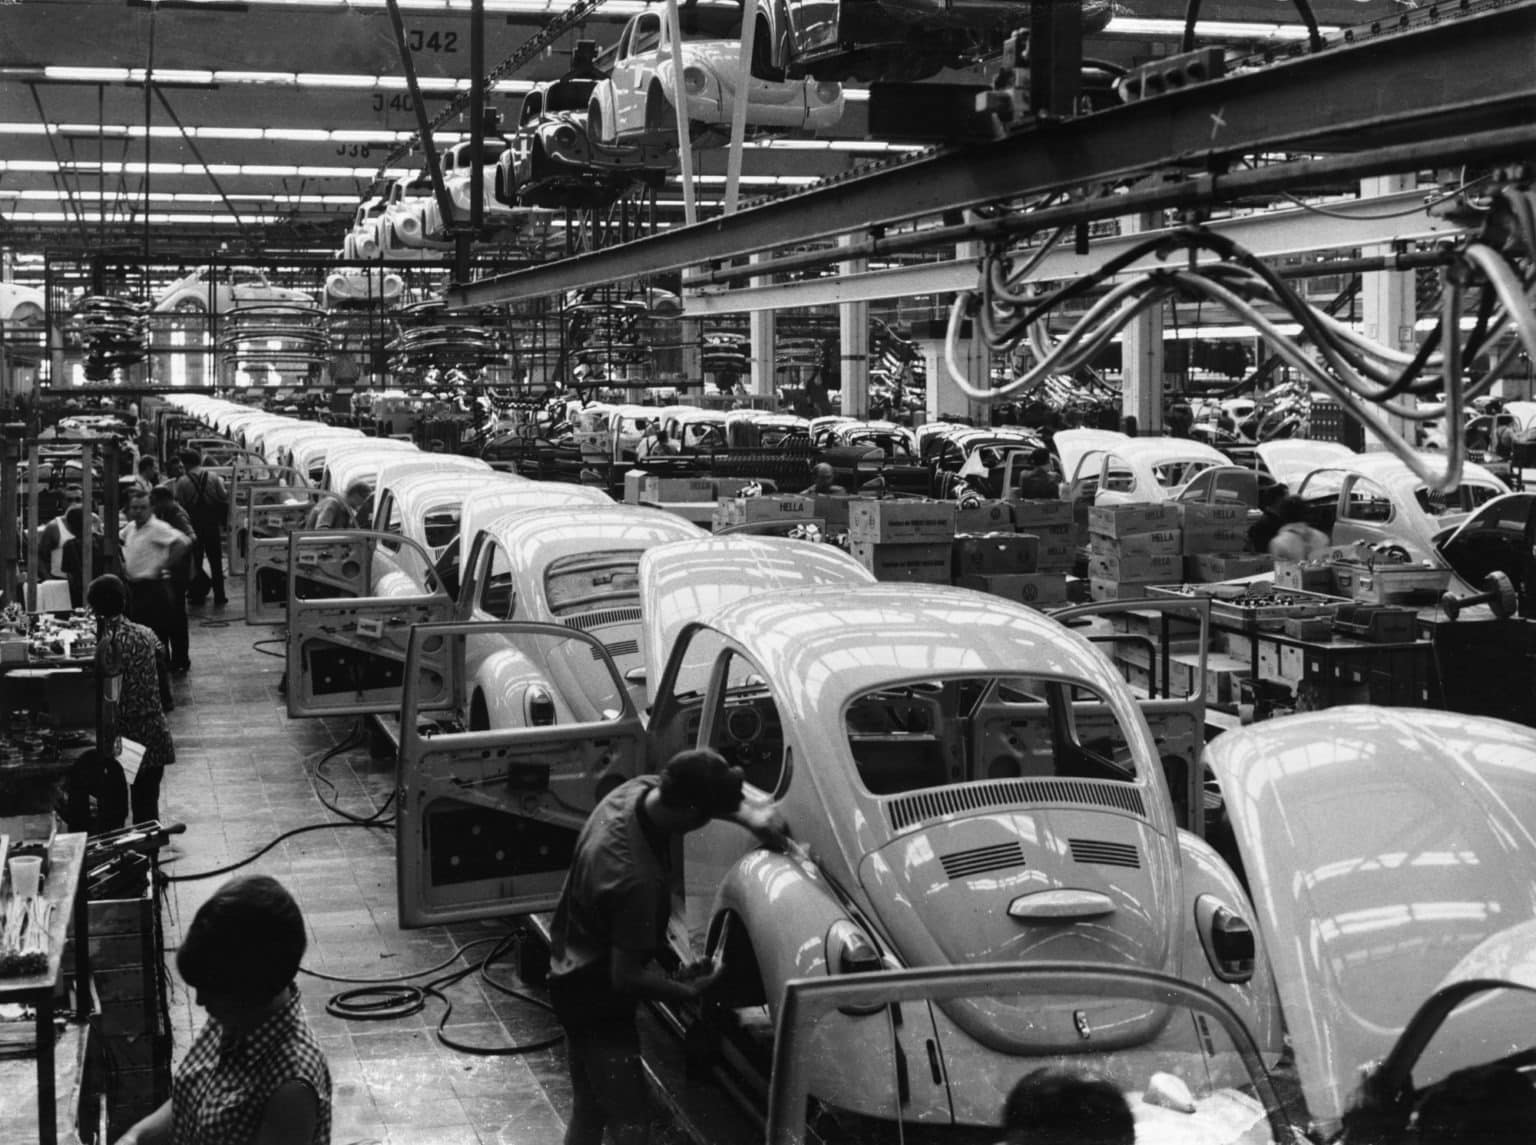 A black and white image of a VW Bettle production line.